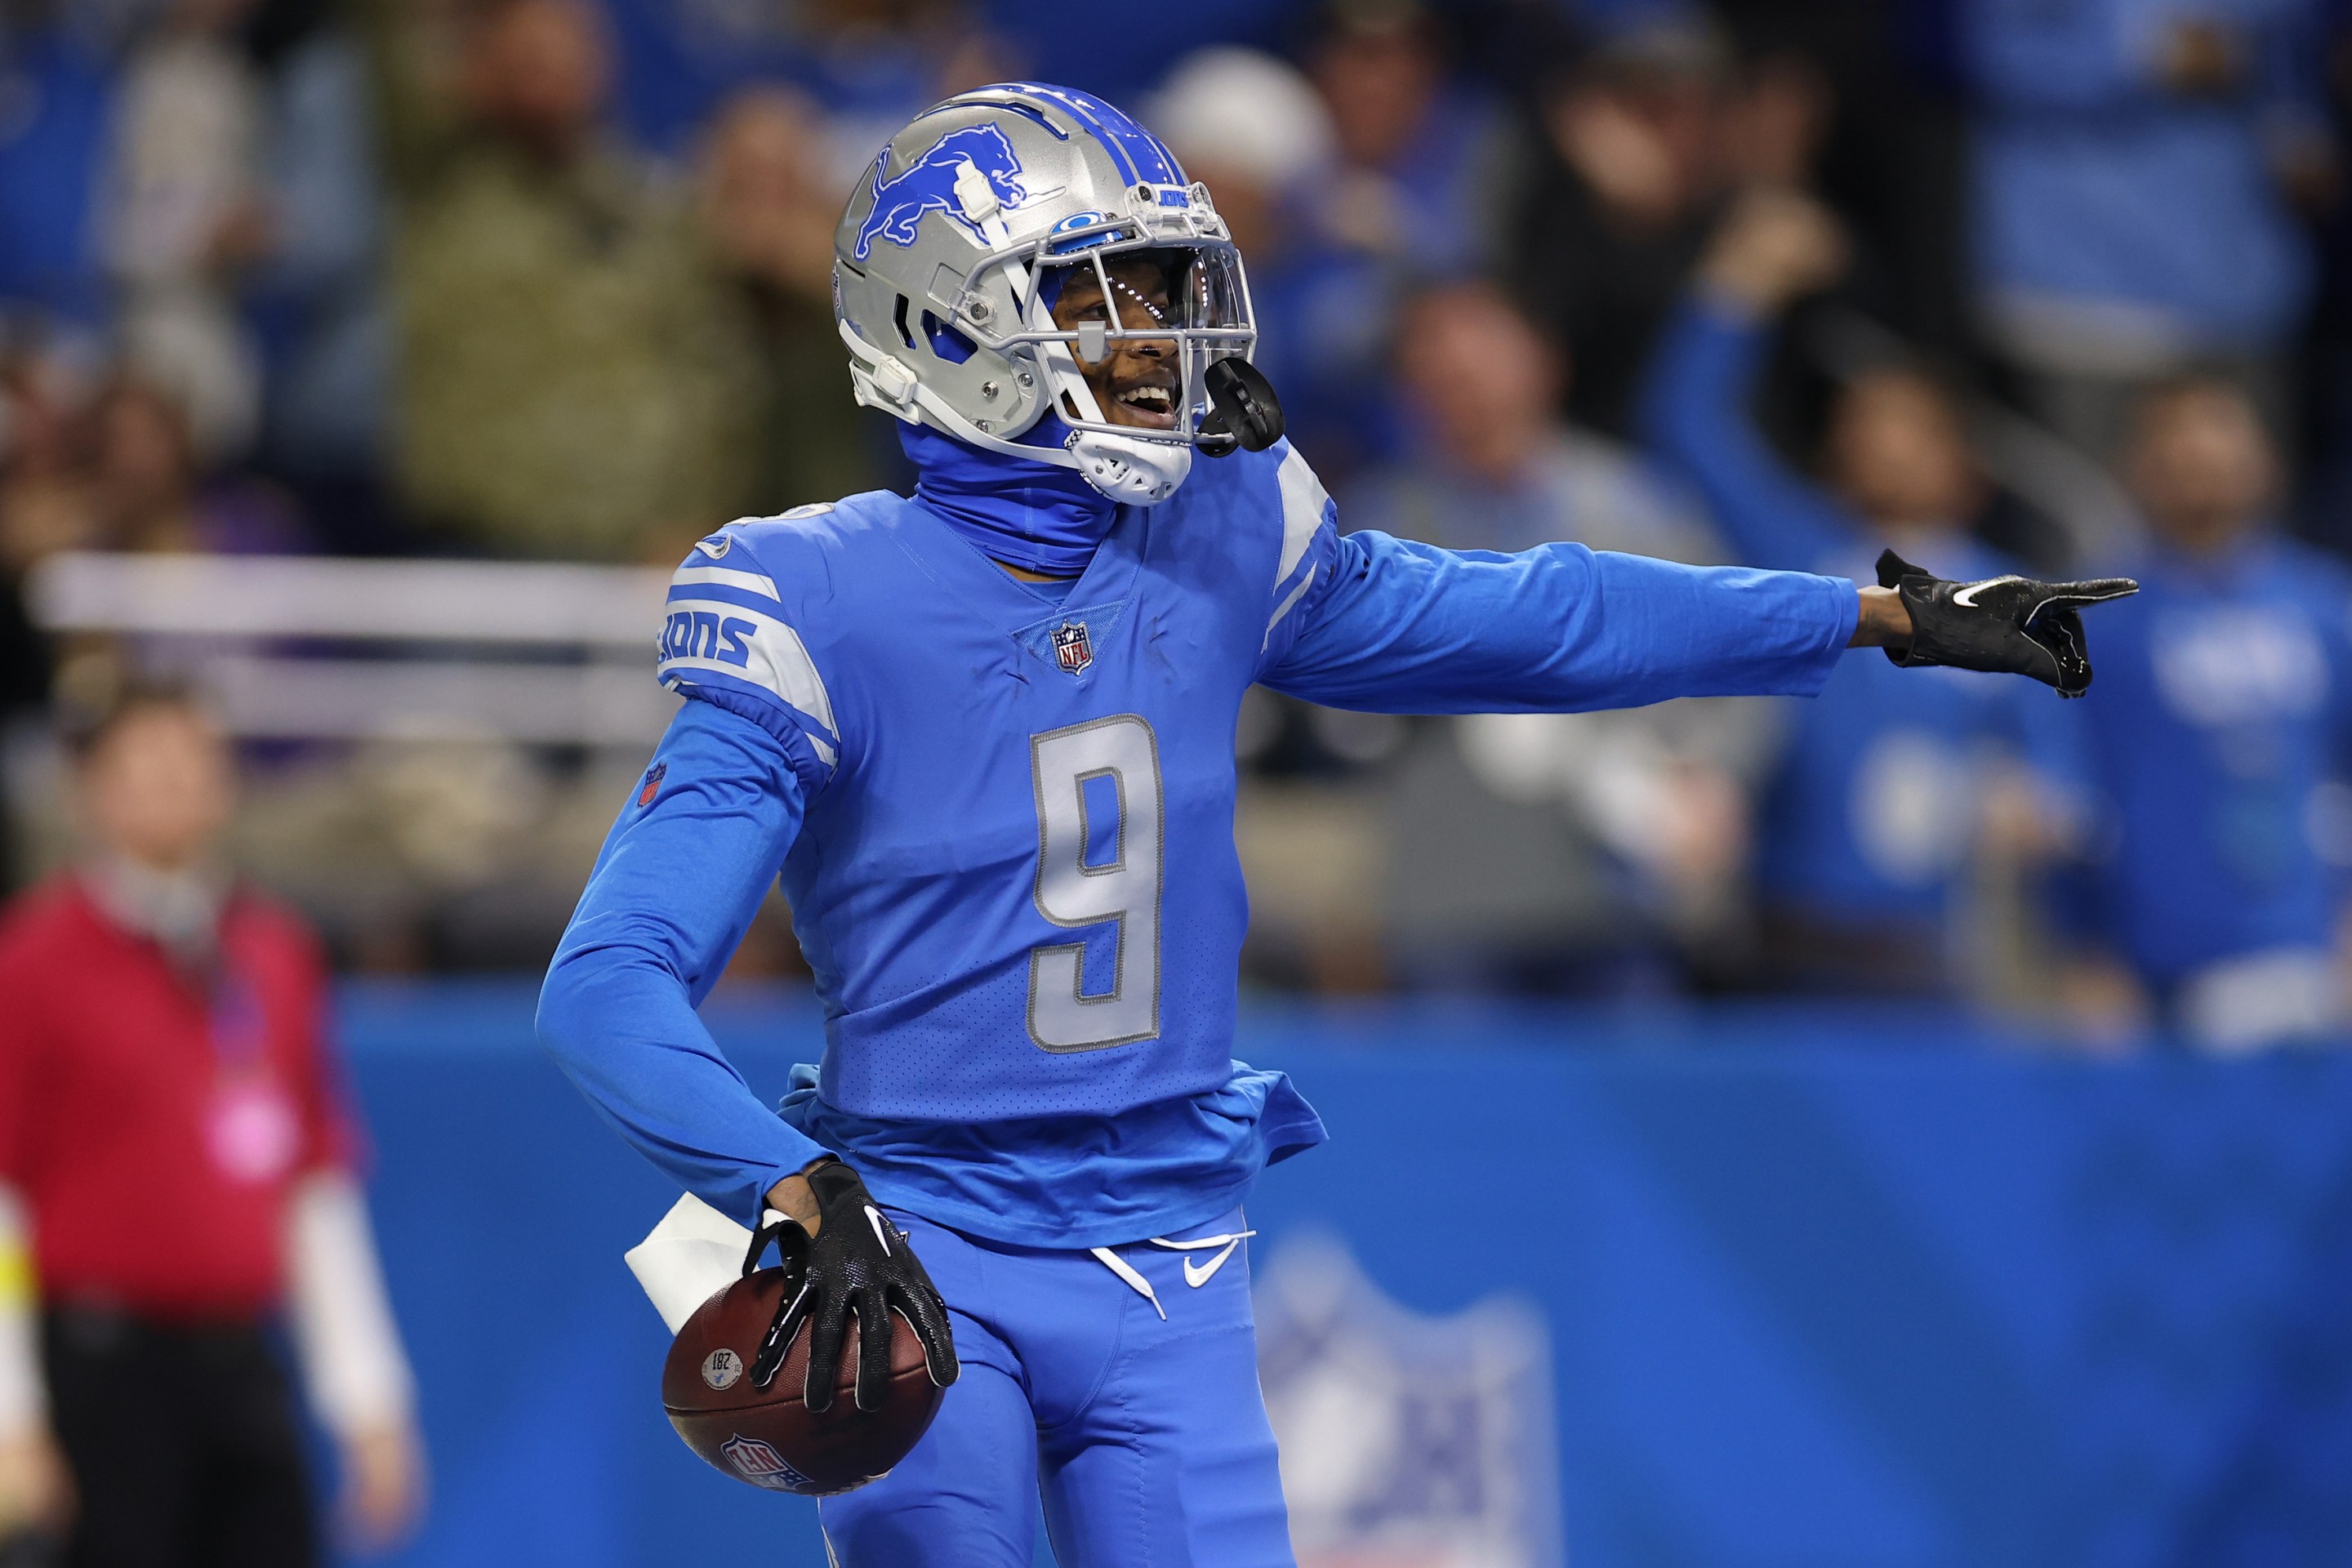 Jameson Williams #9 of the Detroit Lions reacts after a play during the fourth quarter against the Minnesota Vikings at Ford Field on December 11, 2022 in Detroit, Michigan.